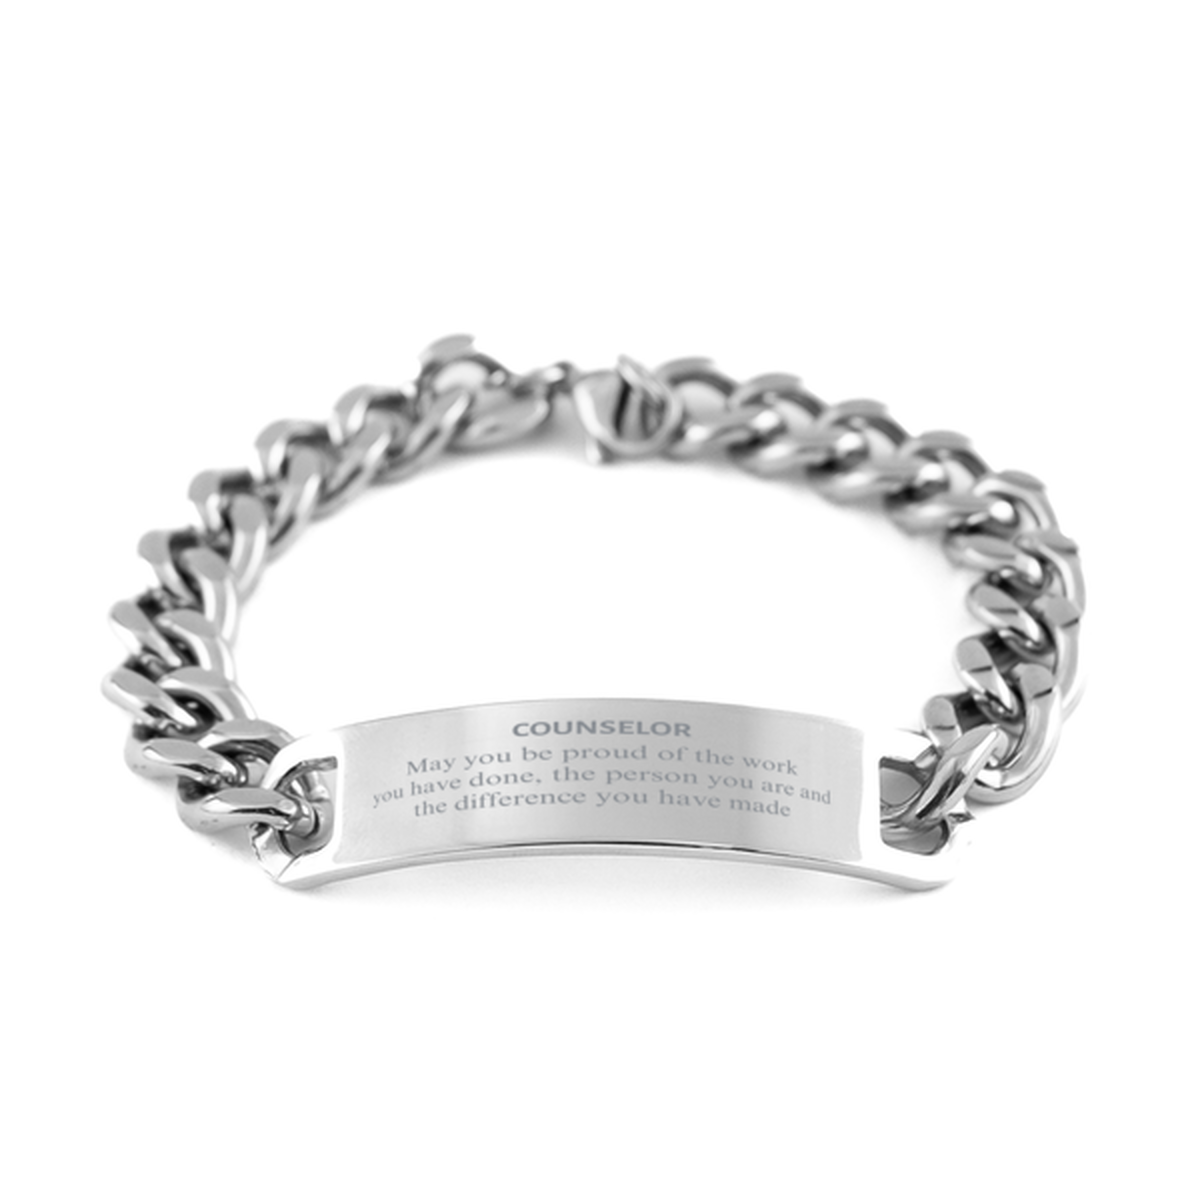 Counselor May you be proud of the work you have done, Retirement Counselor Cuban Chain Stainless Steel Bracelet for Colleague Appreciation Gifts Amazing for Counselor